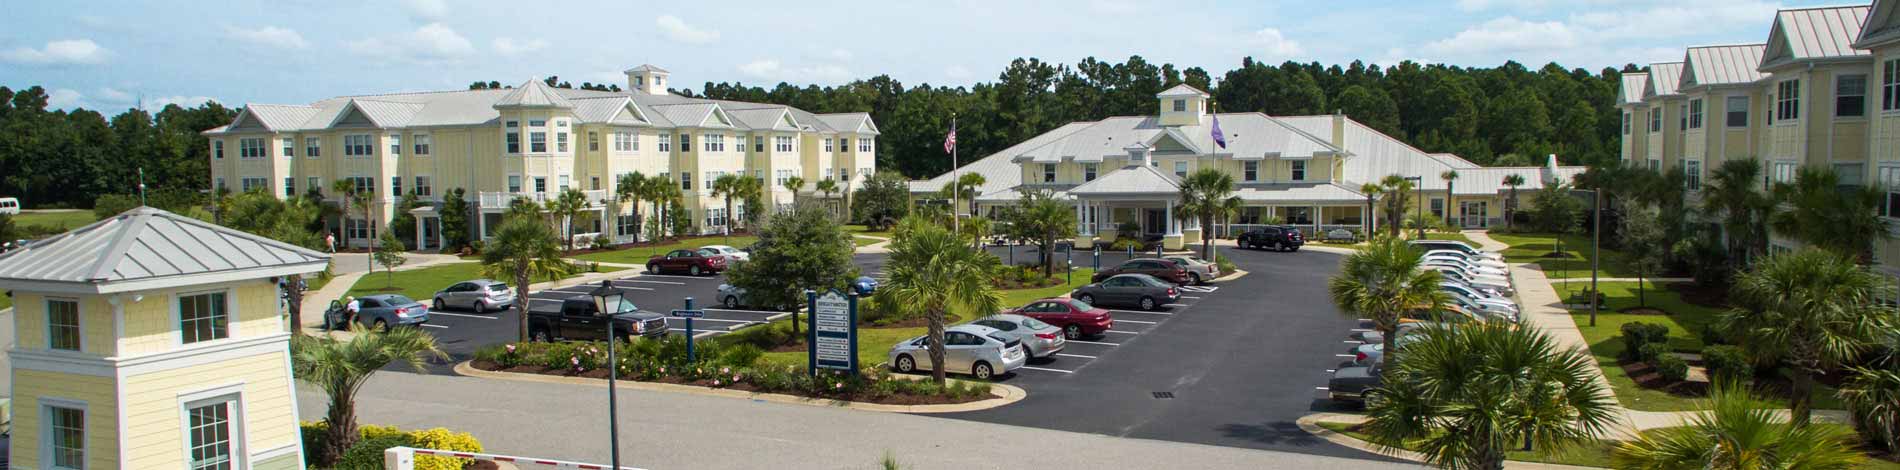 About Brightwater Community in Myrtle Beach